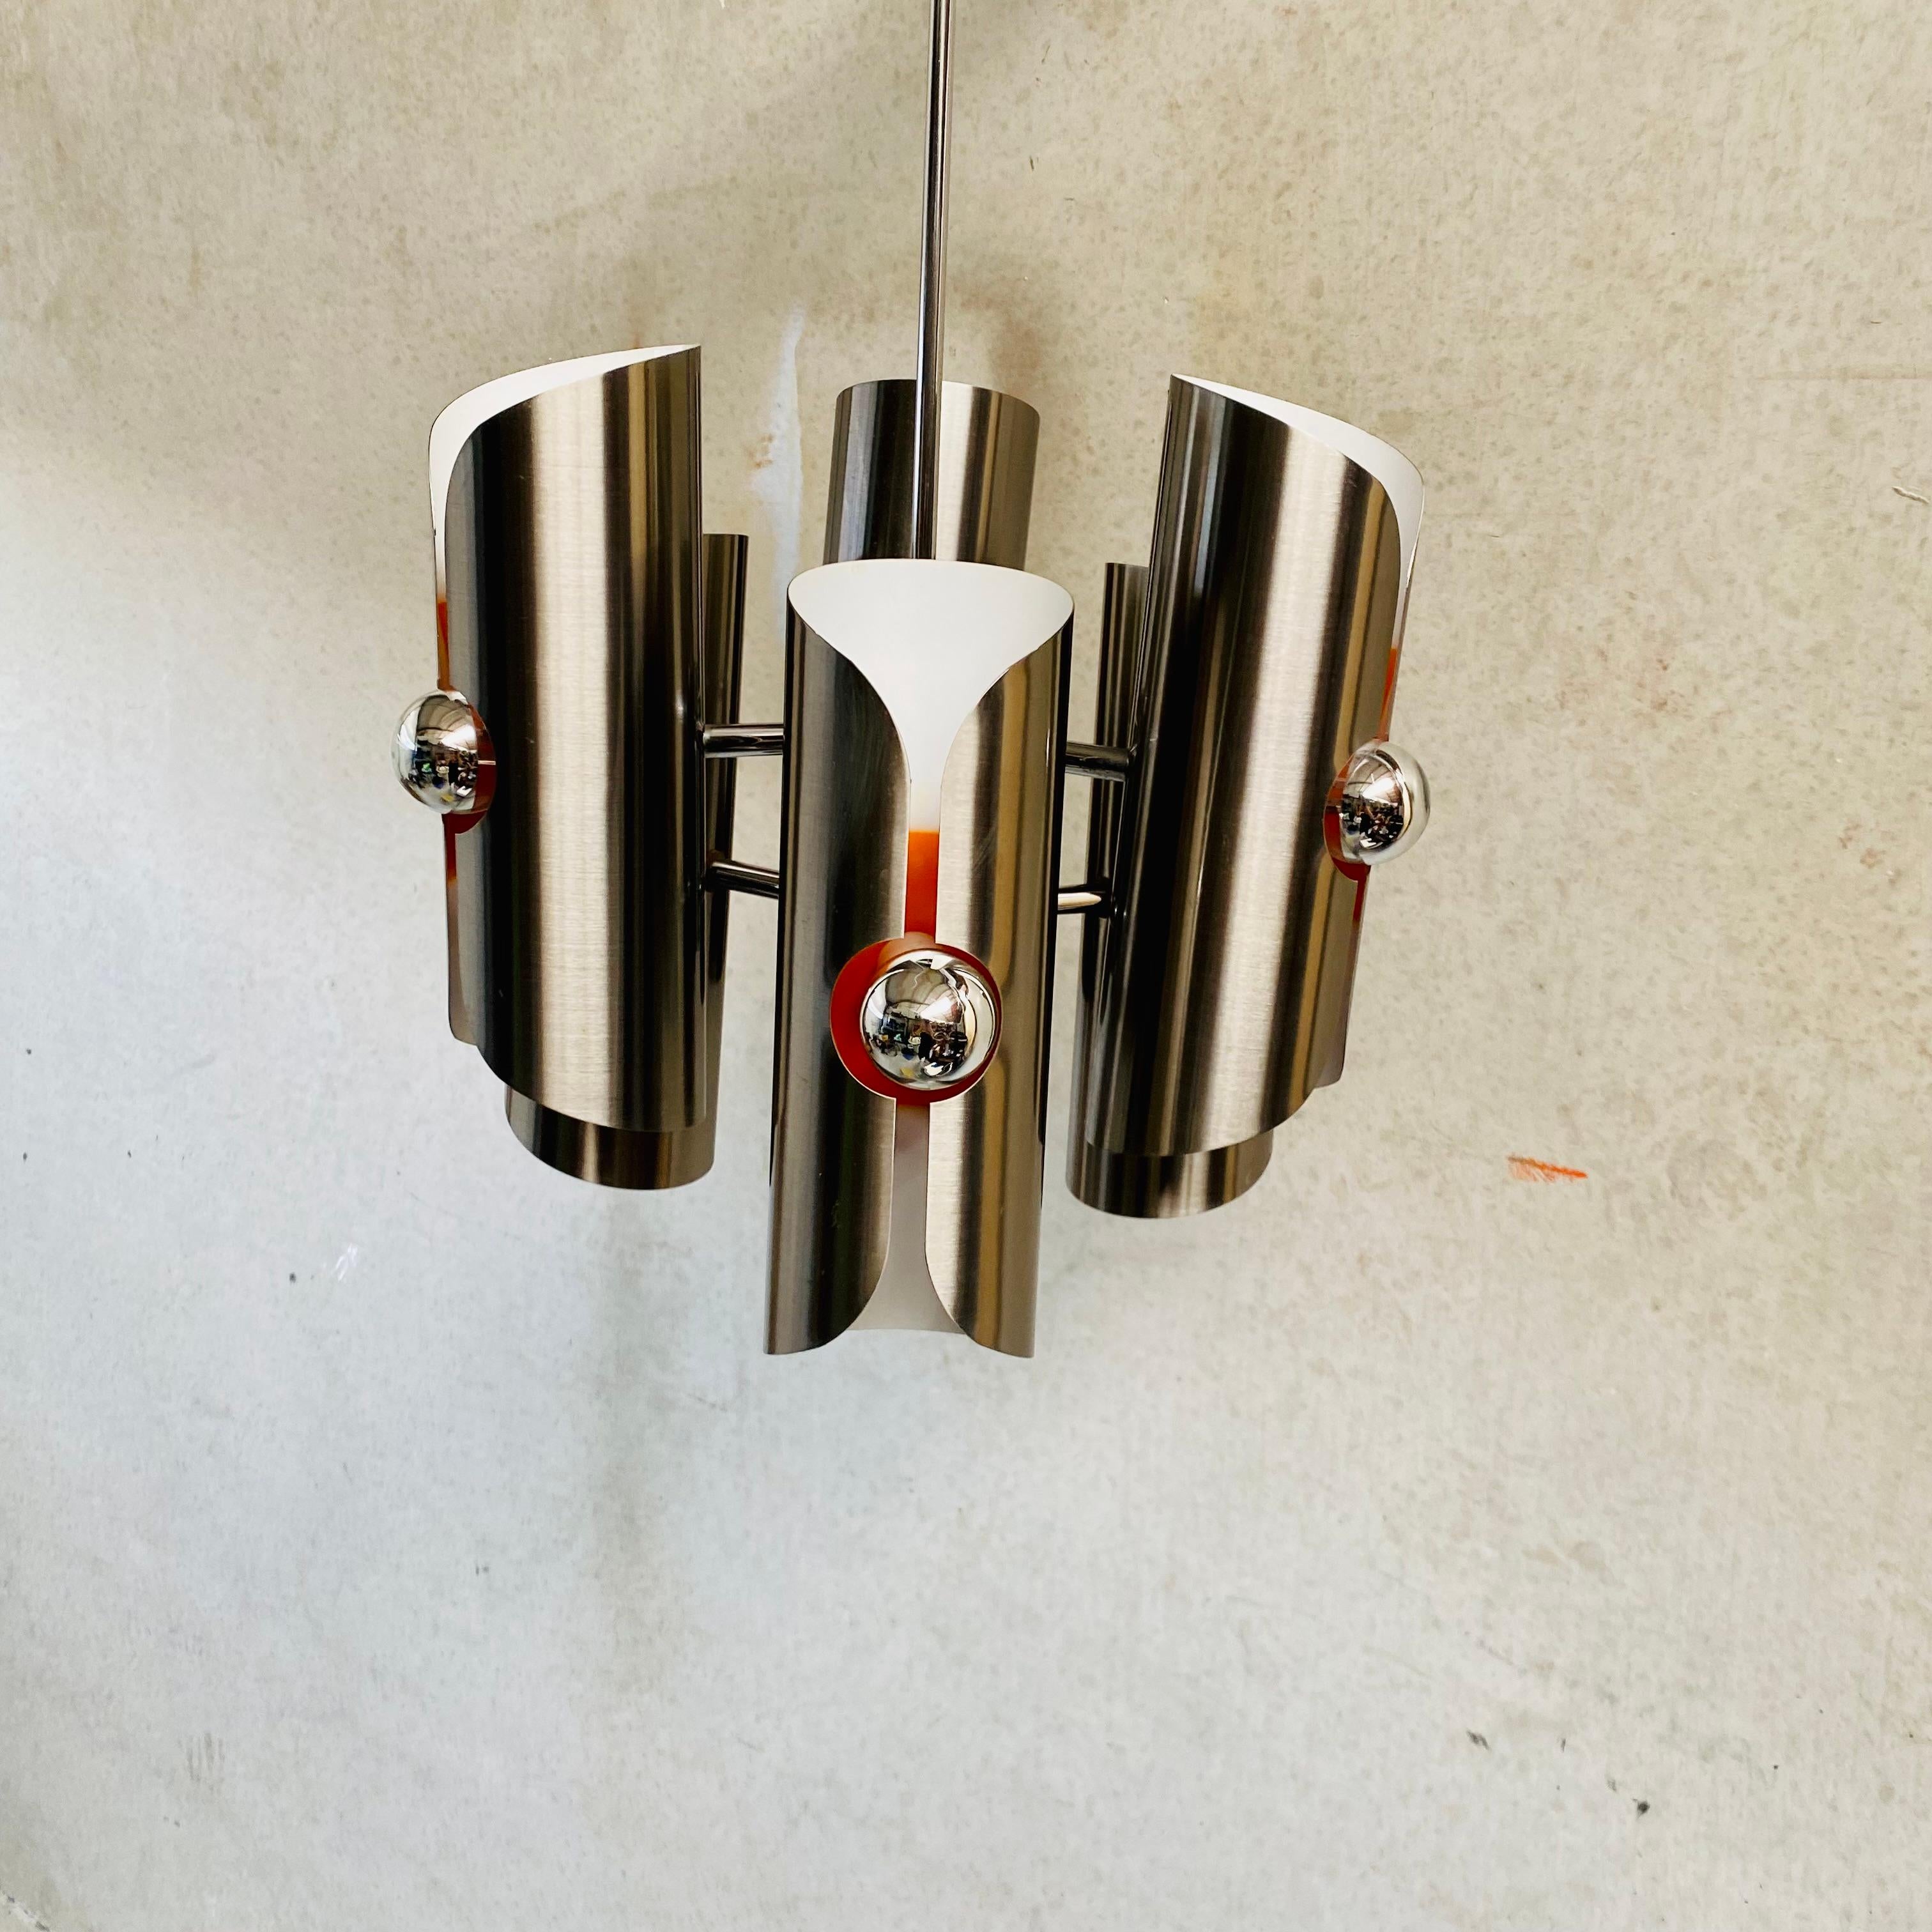 Late 20th Century Mid-Century Stainless Steel Space Age Chandelier by Polam, Poland 1970 For Sale